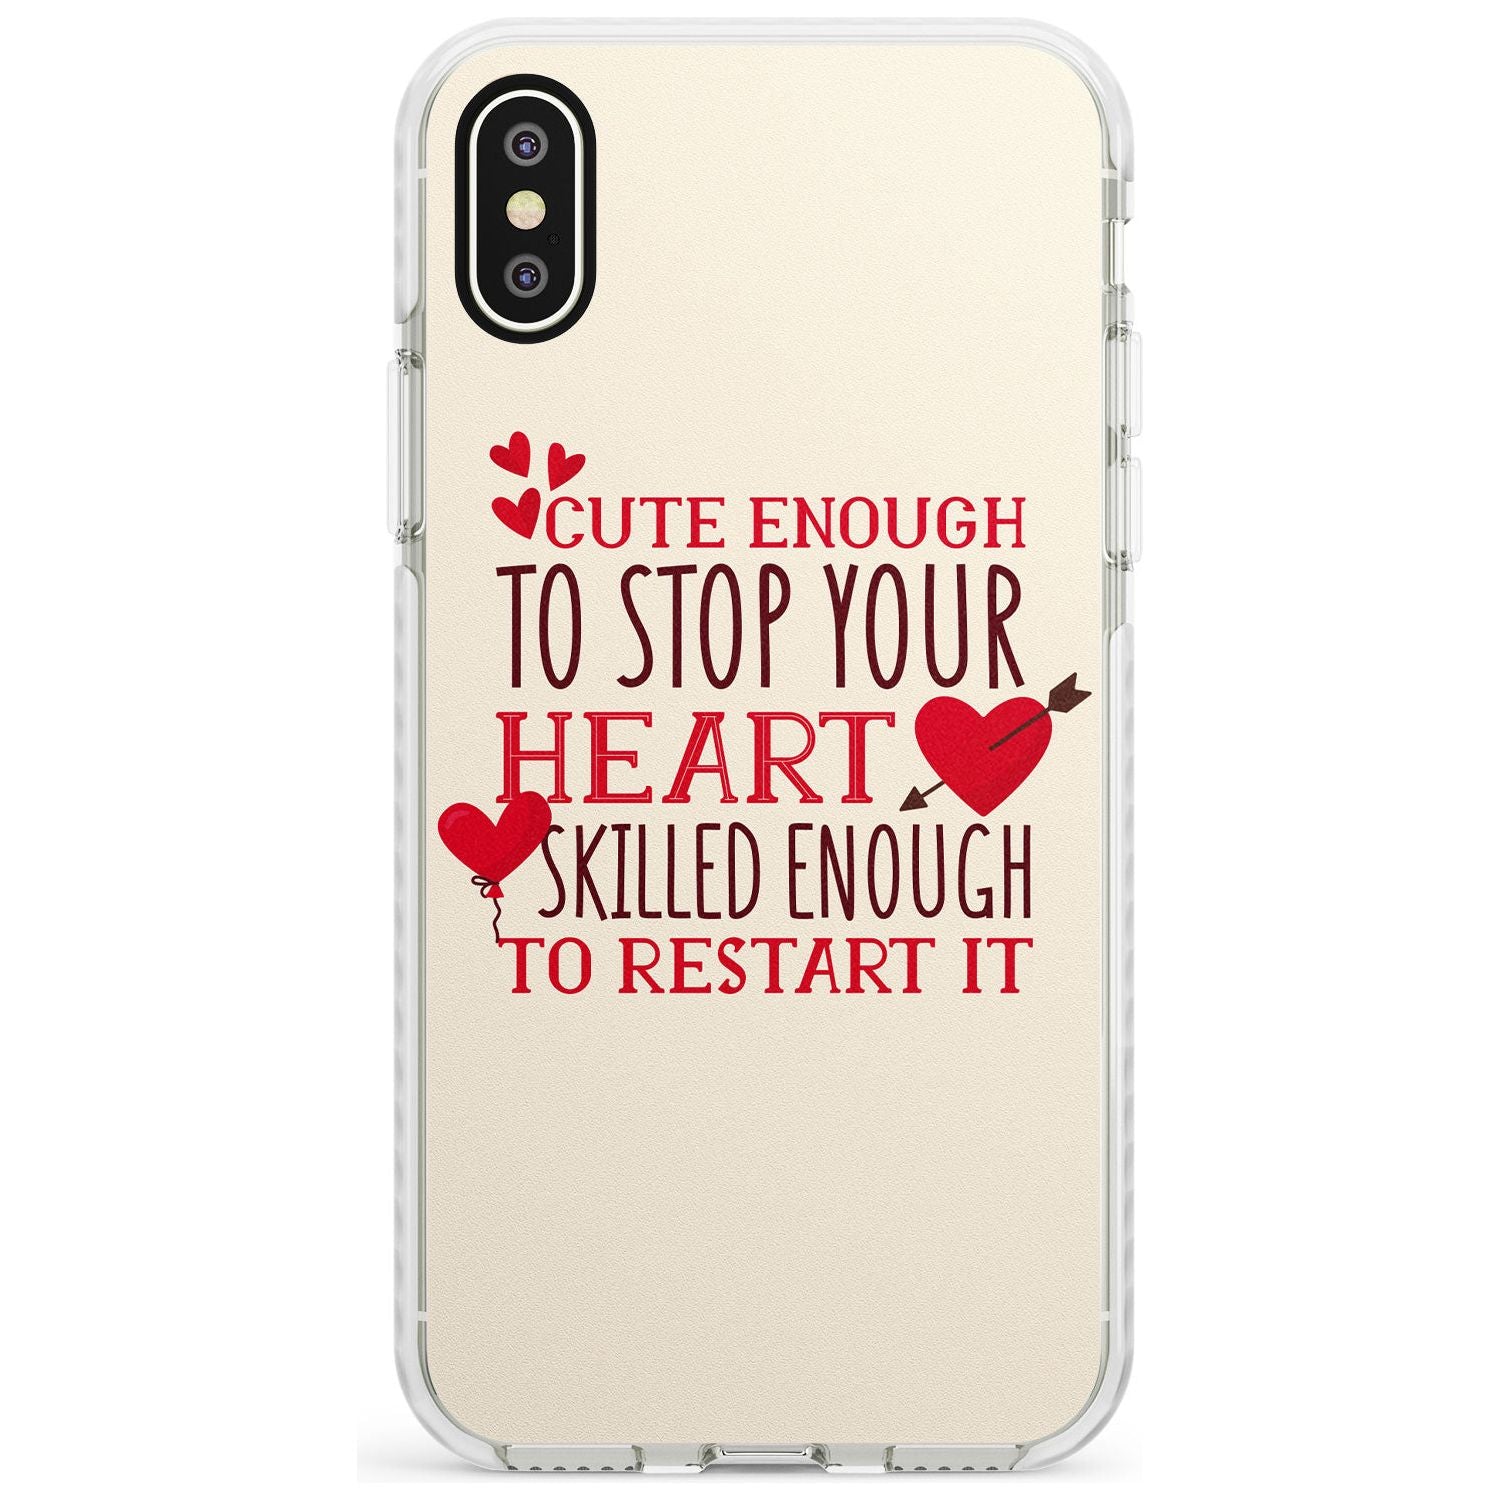 Medical Design Cute Enough to Stop Your Heart Impact Phone Case for iPhone X XS Max XR